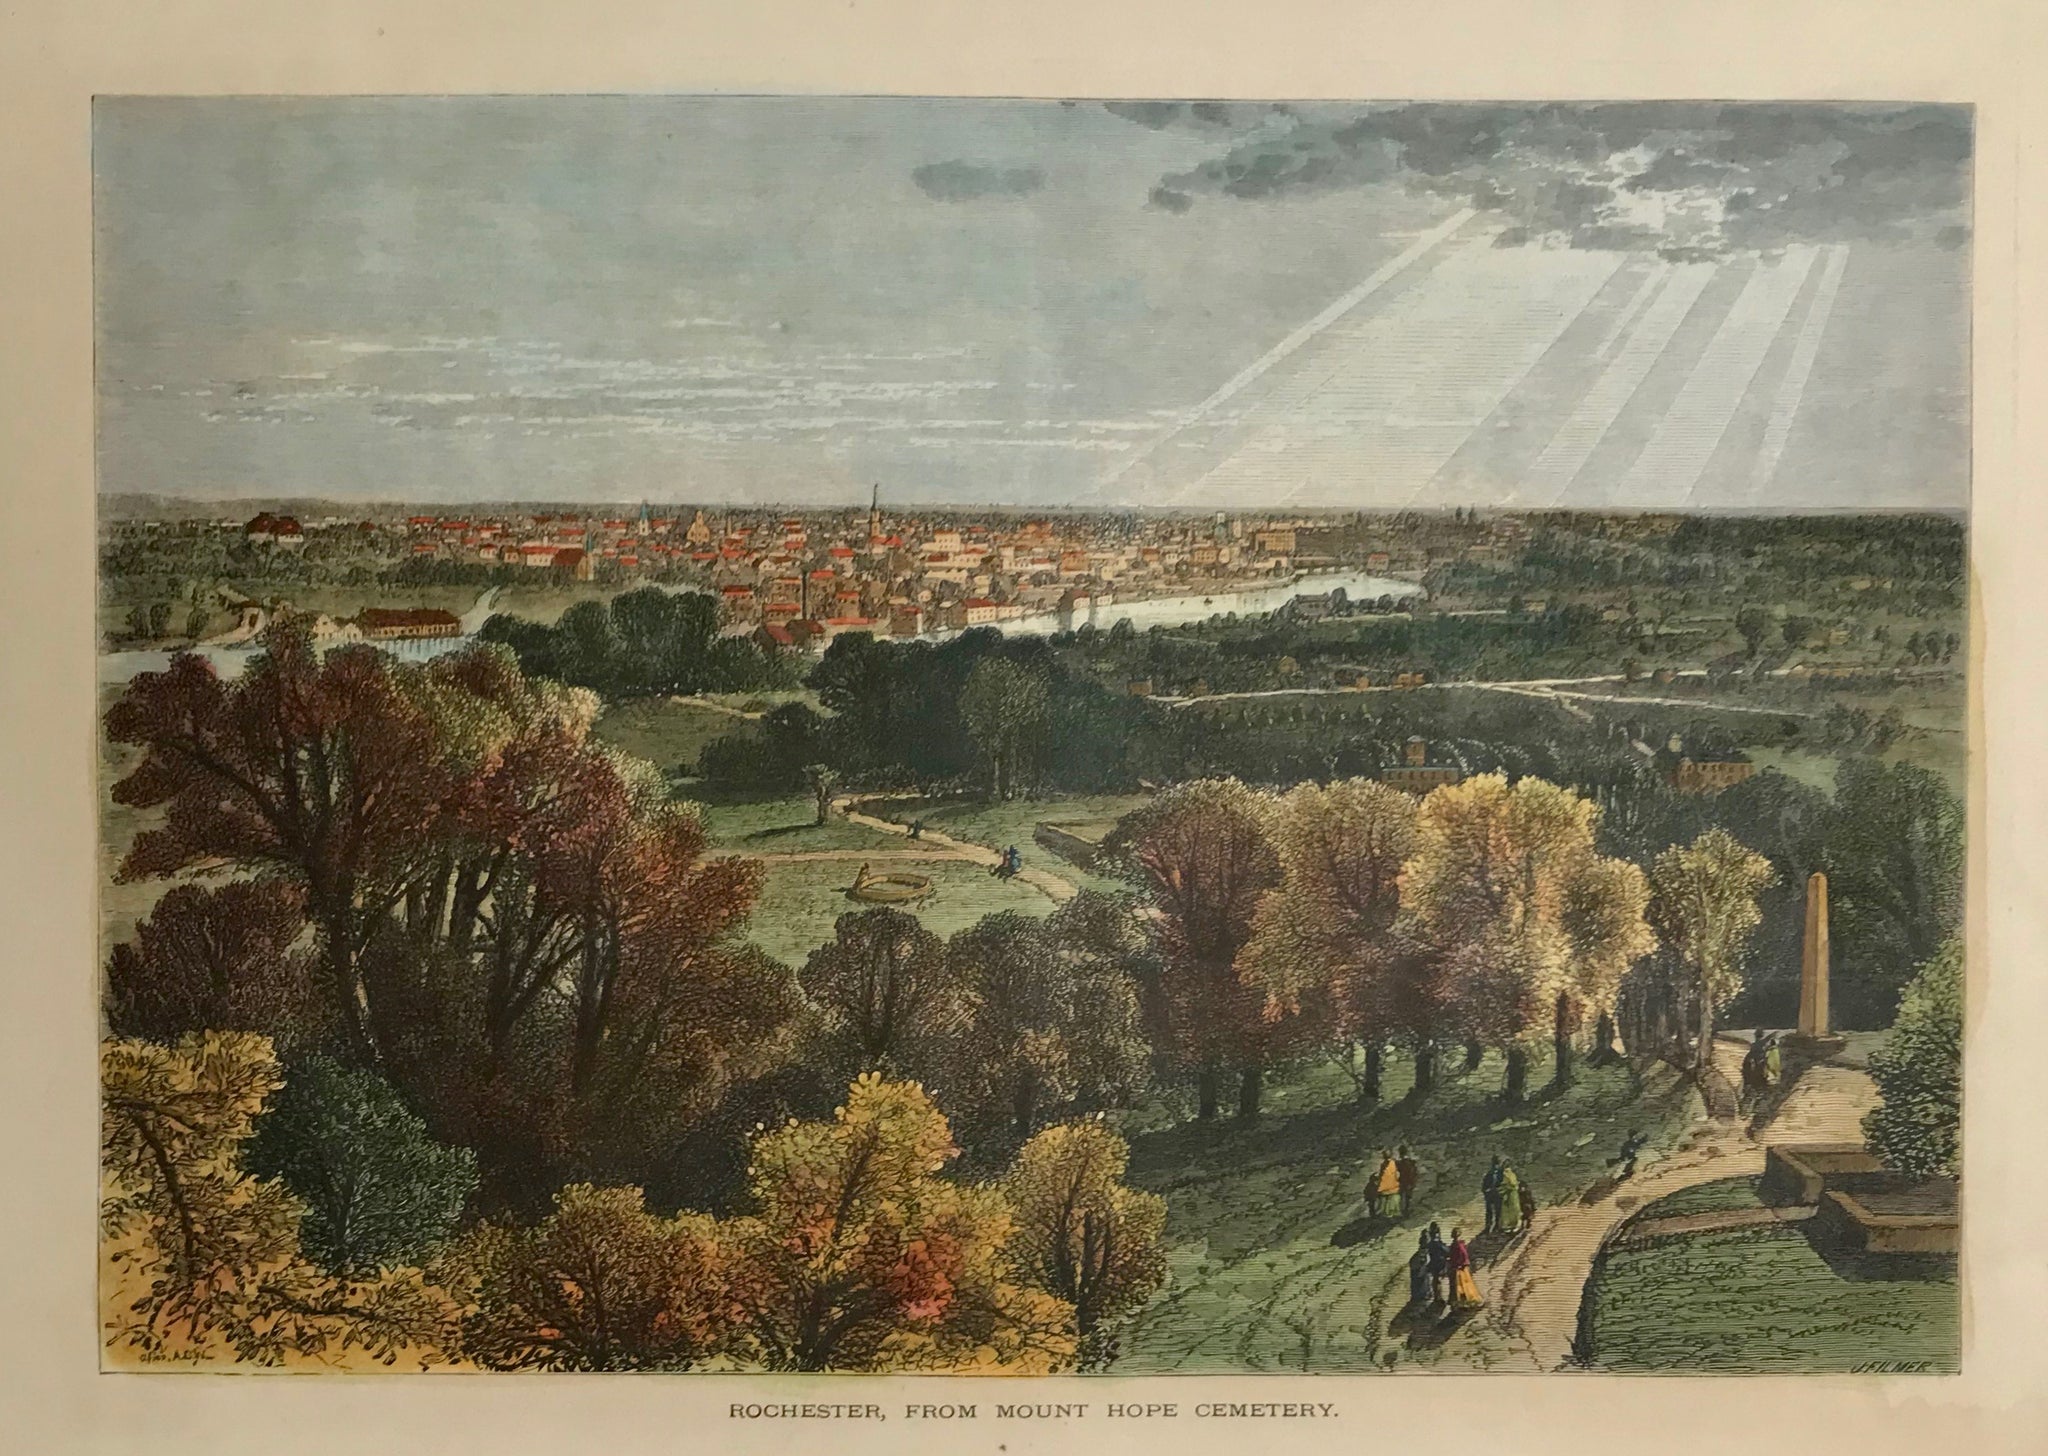 Frontside image: Rochester, From Mount Hope Cemetery  15.7 x 23.2 cm ( 6.1 x 9.1 ") Wide margins. Light stains on margin edges.  Backside image: East Side, Upper Falls of the Genesee.  21.2 x 15.5 cm ( 8.3 x 9.1 "). Light staining and spotting in margins.